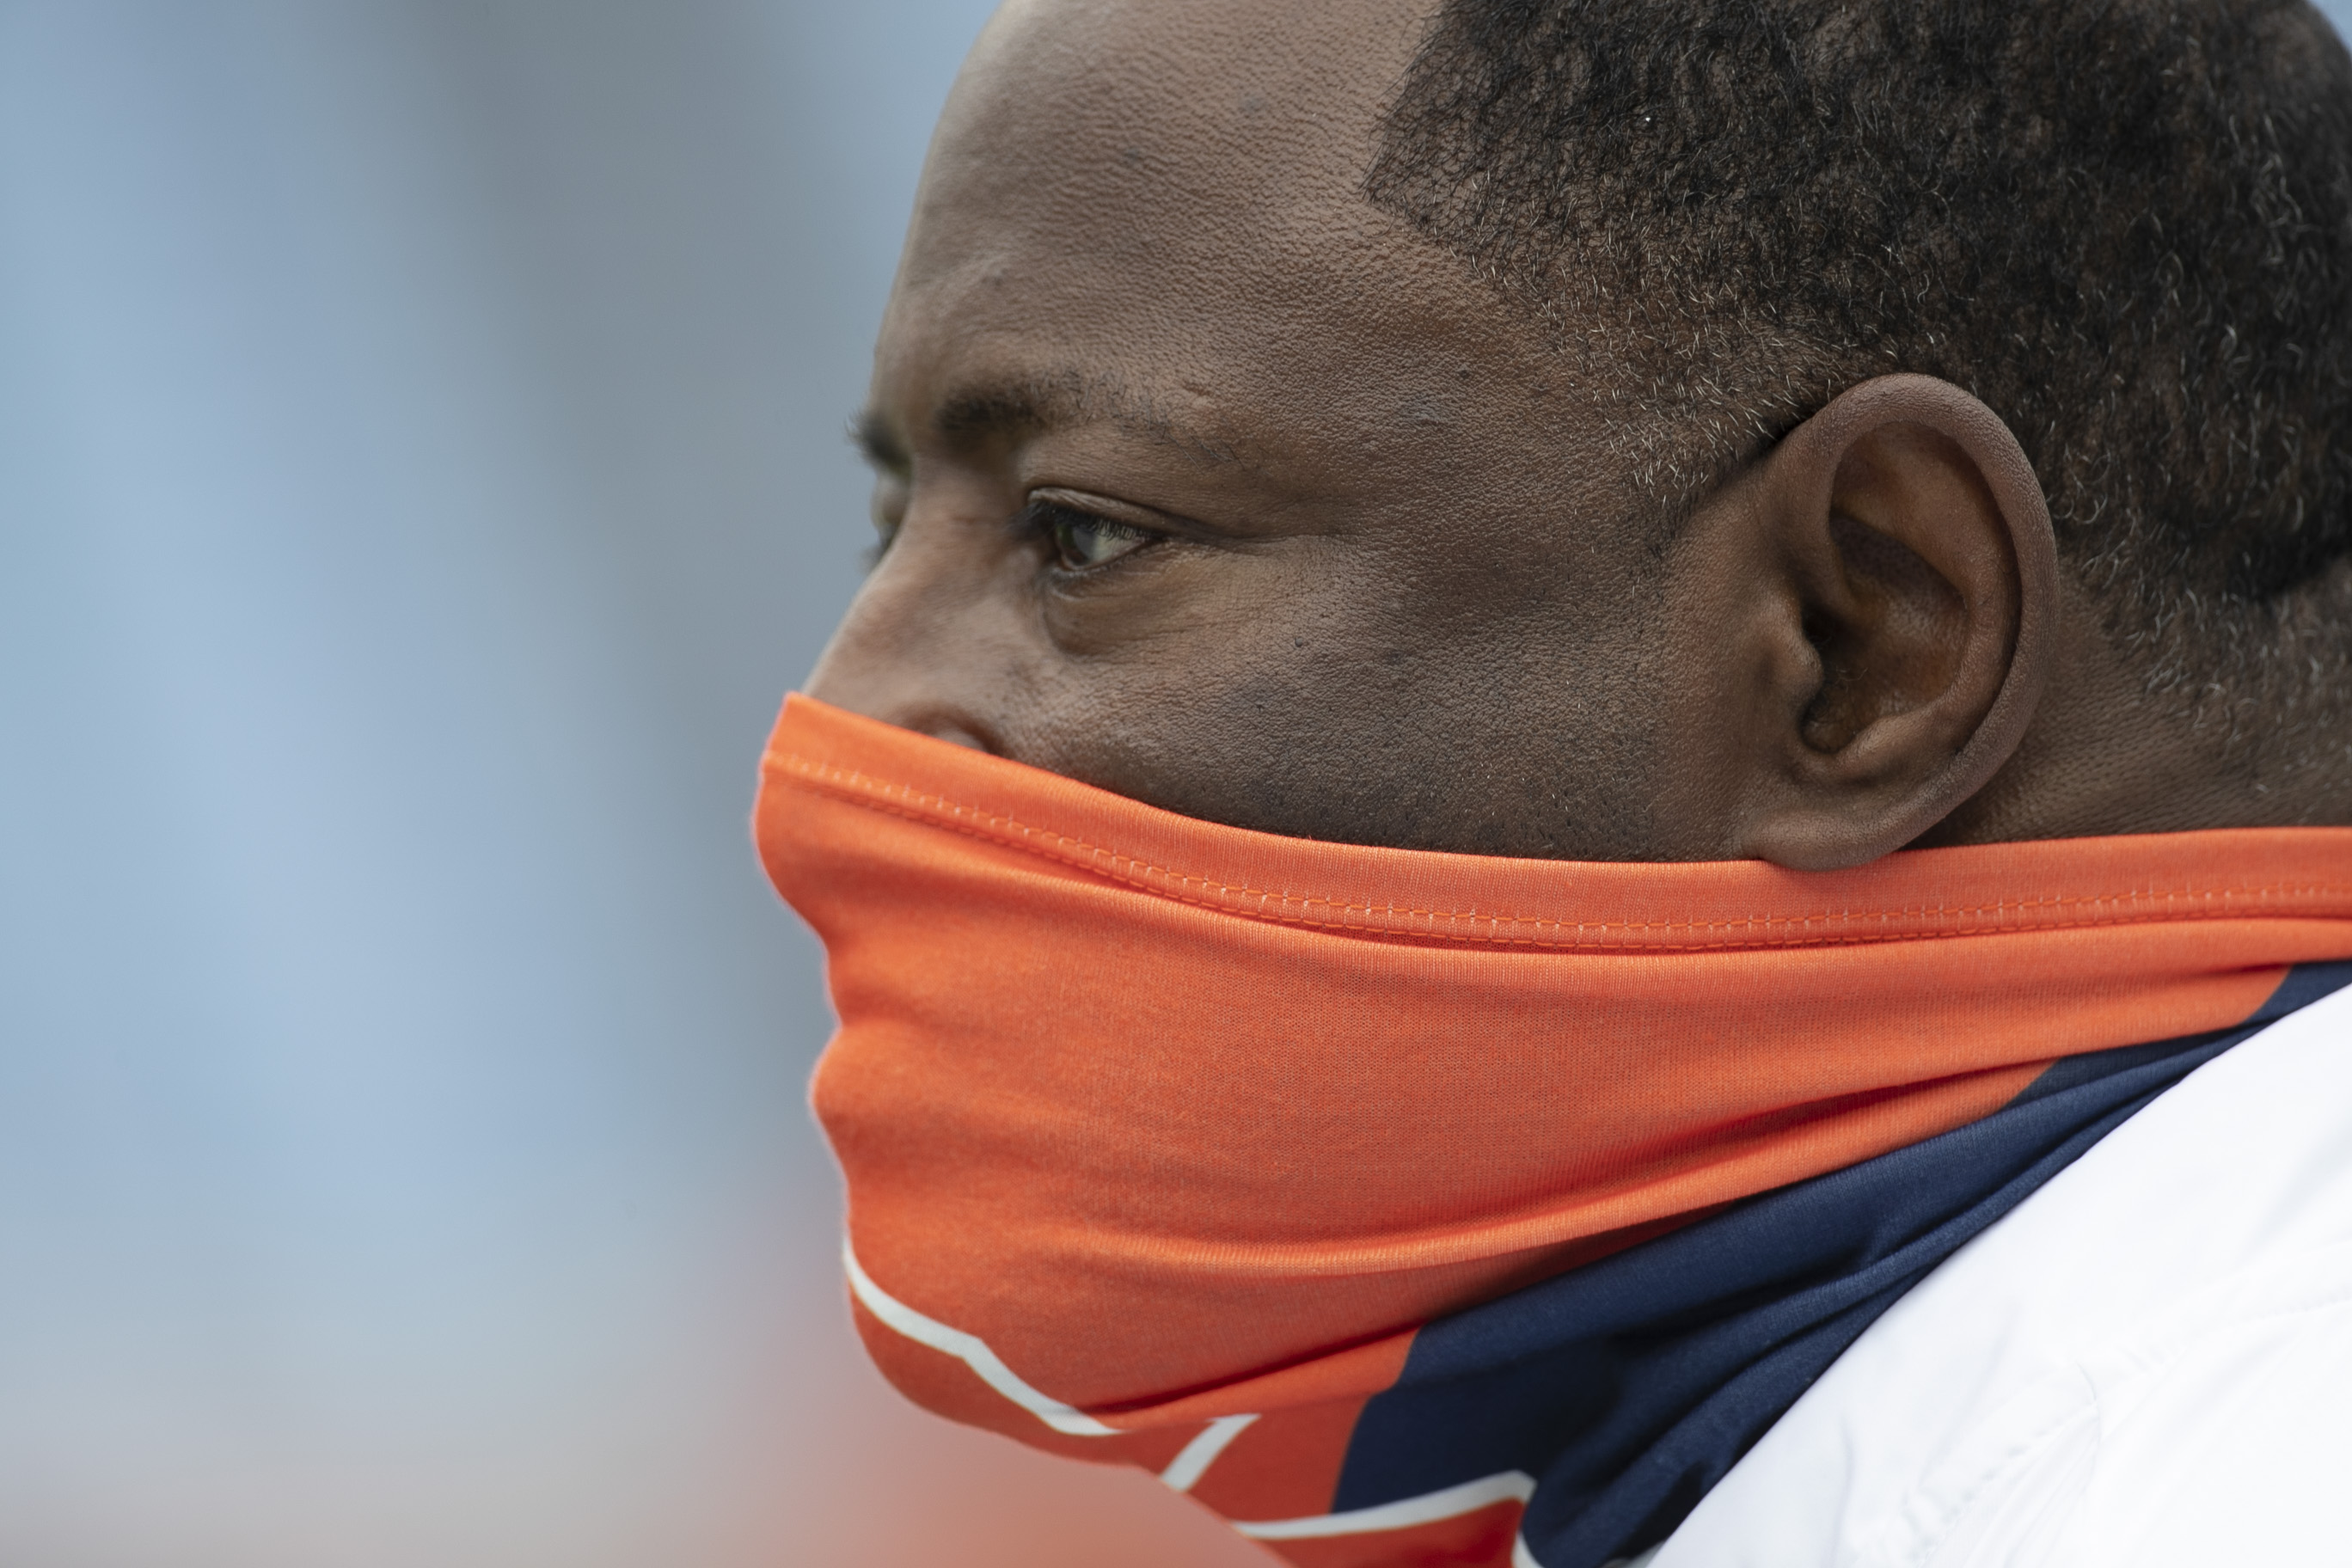 Syracuse head coach Dino Babers watches his team warm up for their game against North Carolina on Saturday, September 12, 2020 in Chapel Hill, N.C.